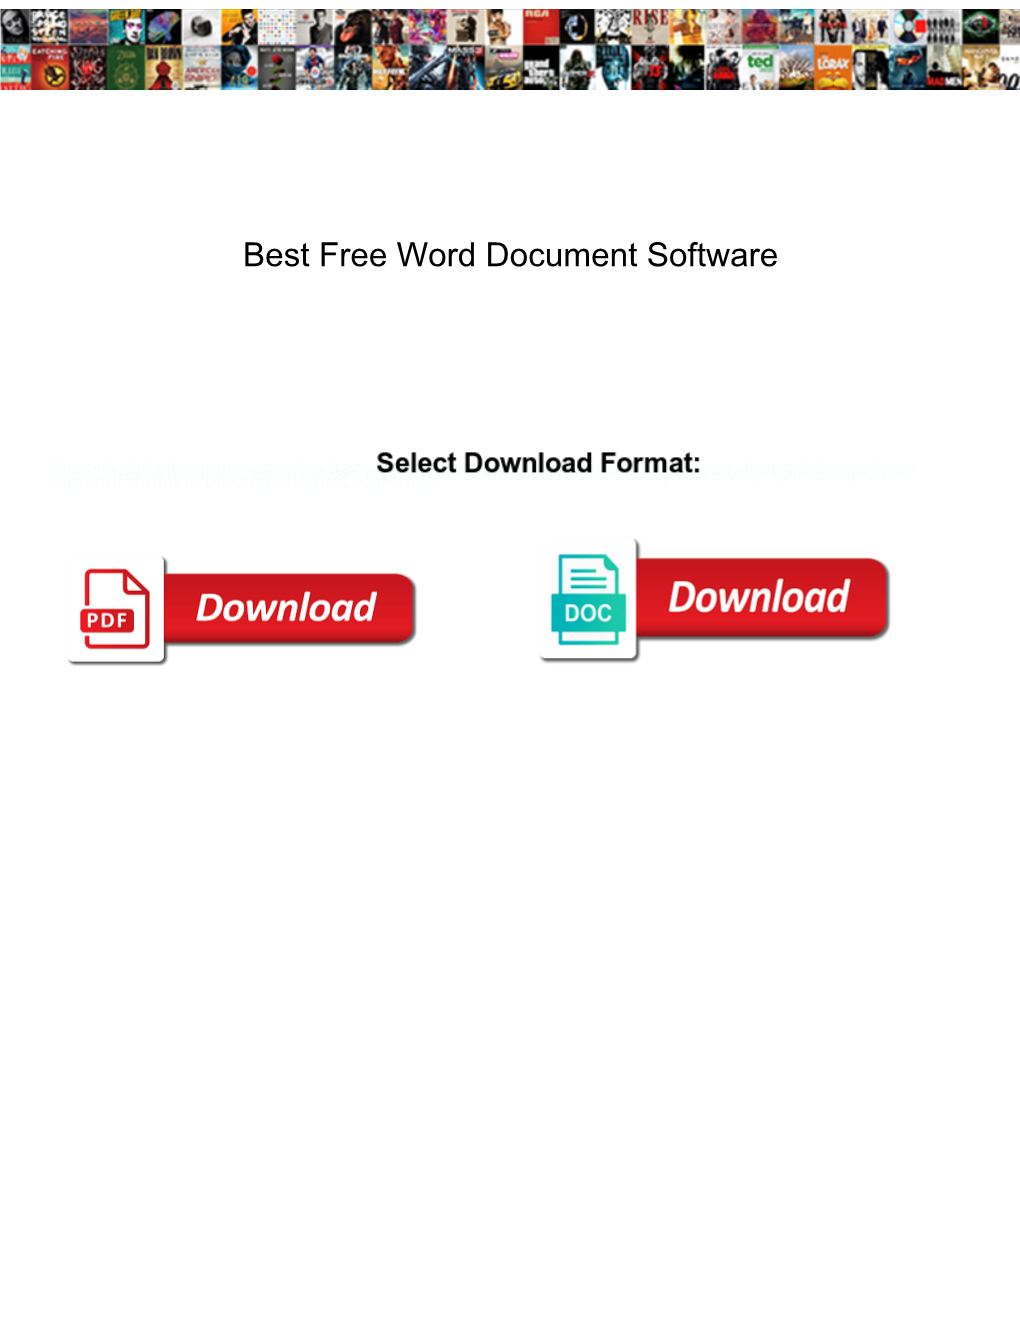 Best Free Word Document Software